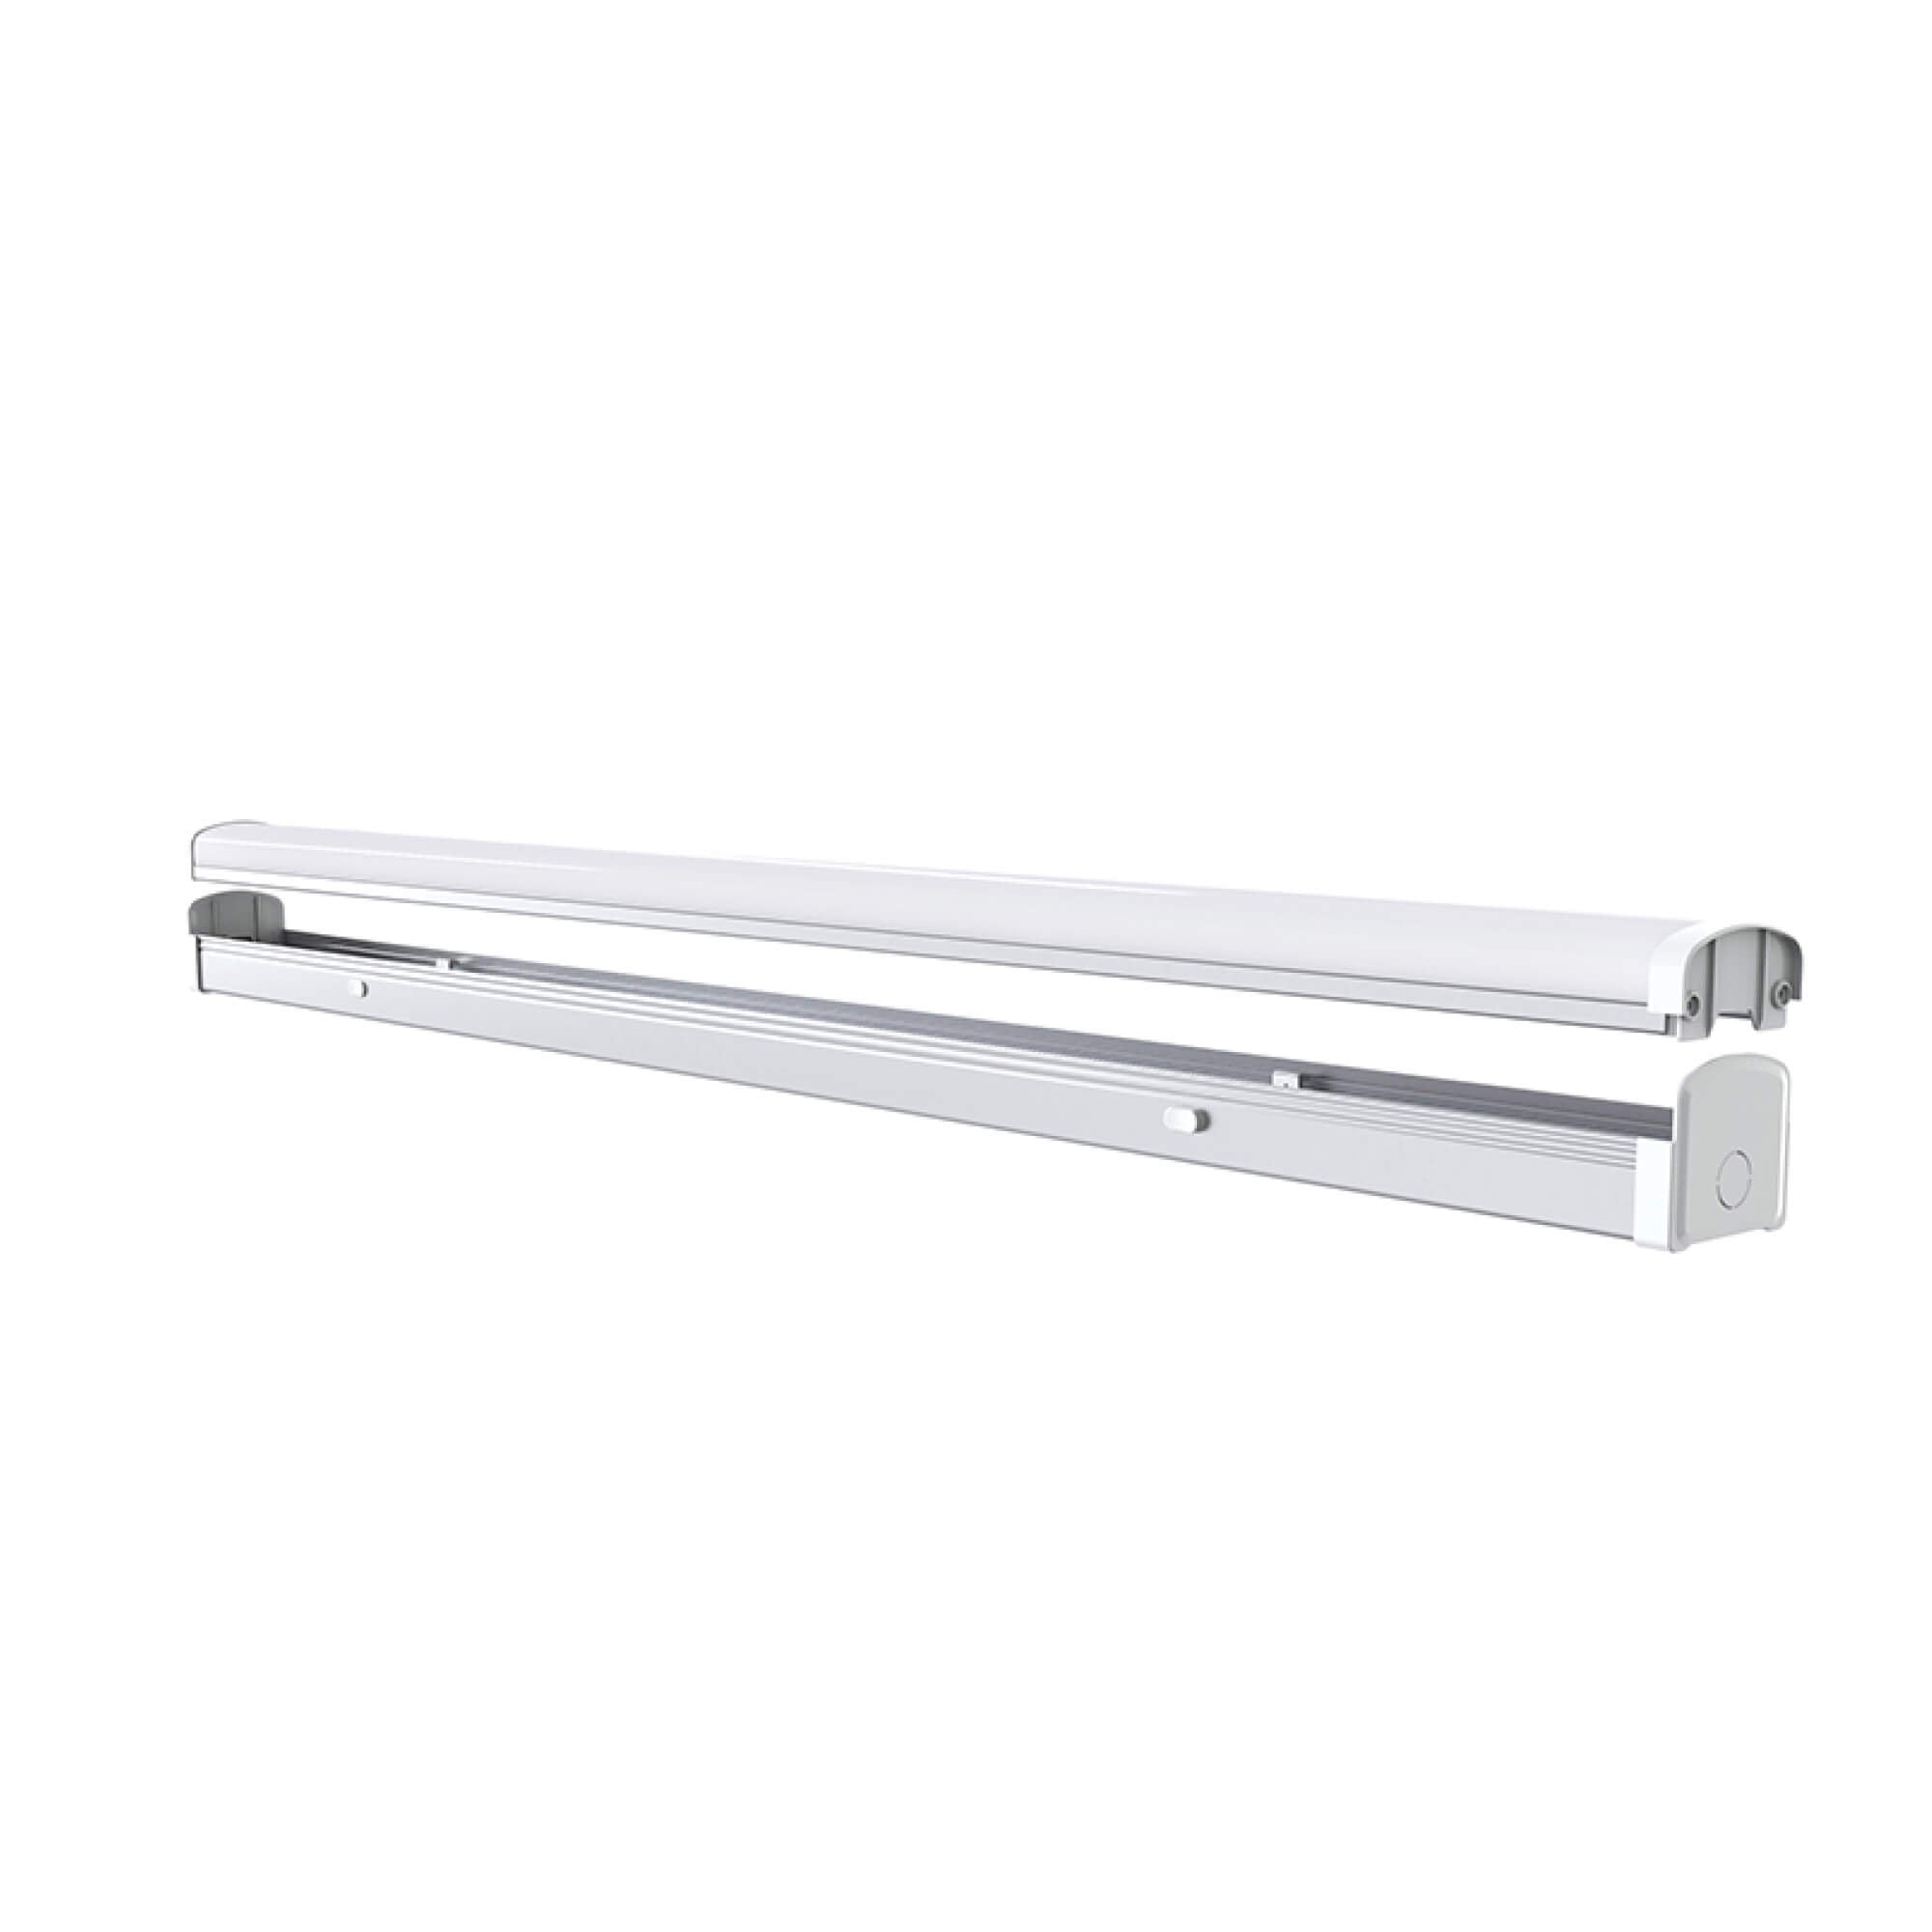 LED Linear Light C2311 with selectable wattages and color temperatures for commercial and residential lighting